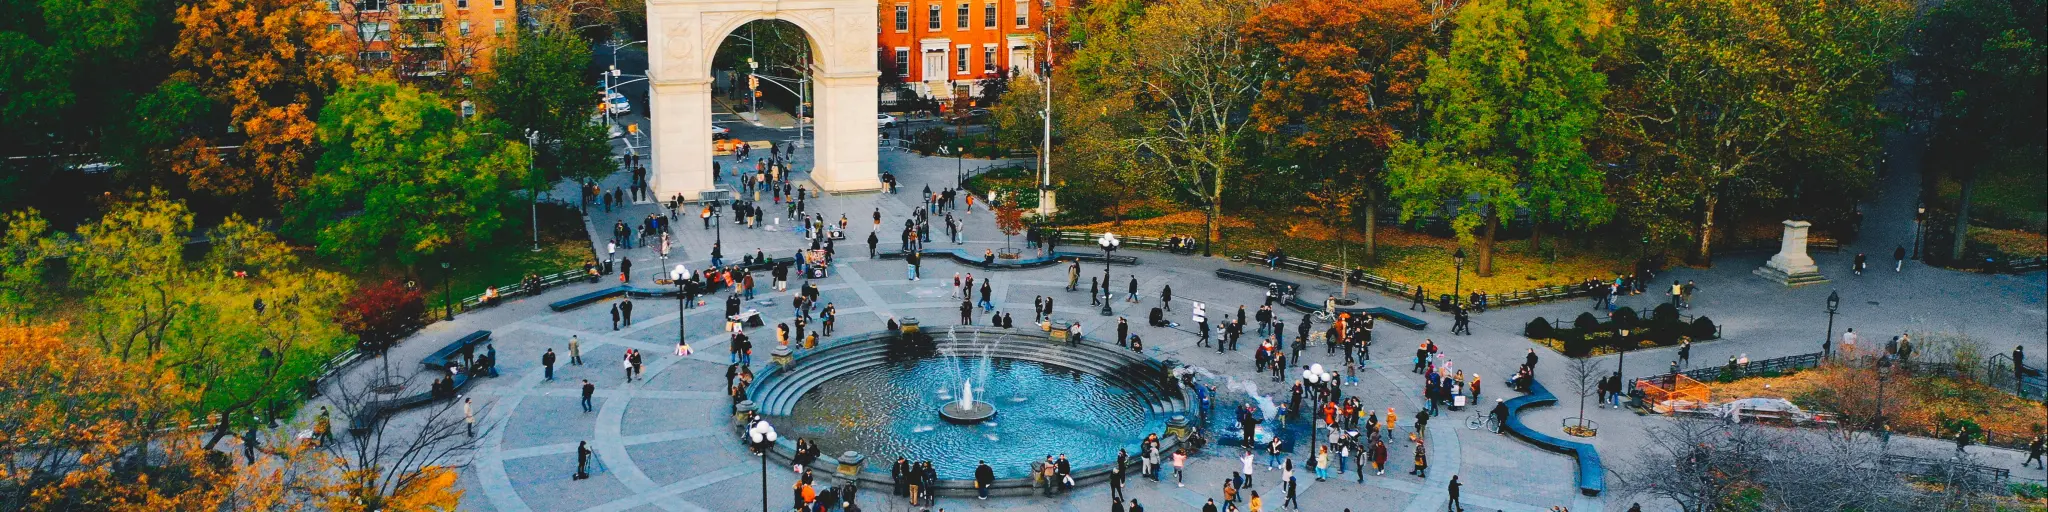 Aerial view over busy Washington Square Park in Greenwich village